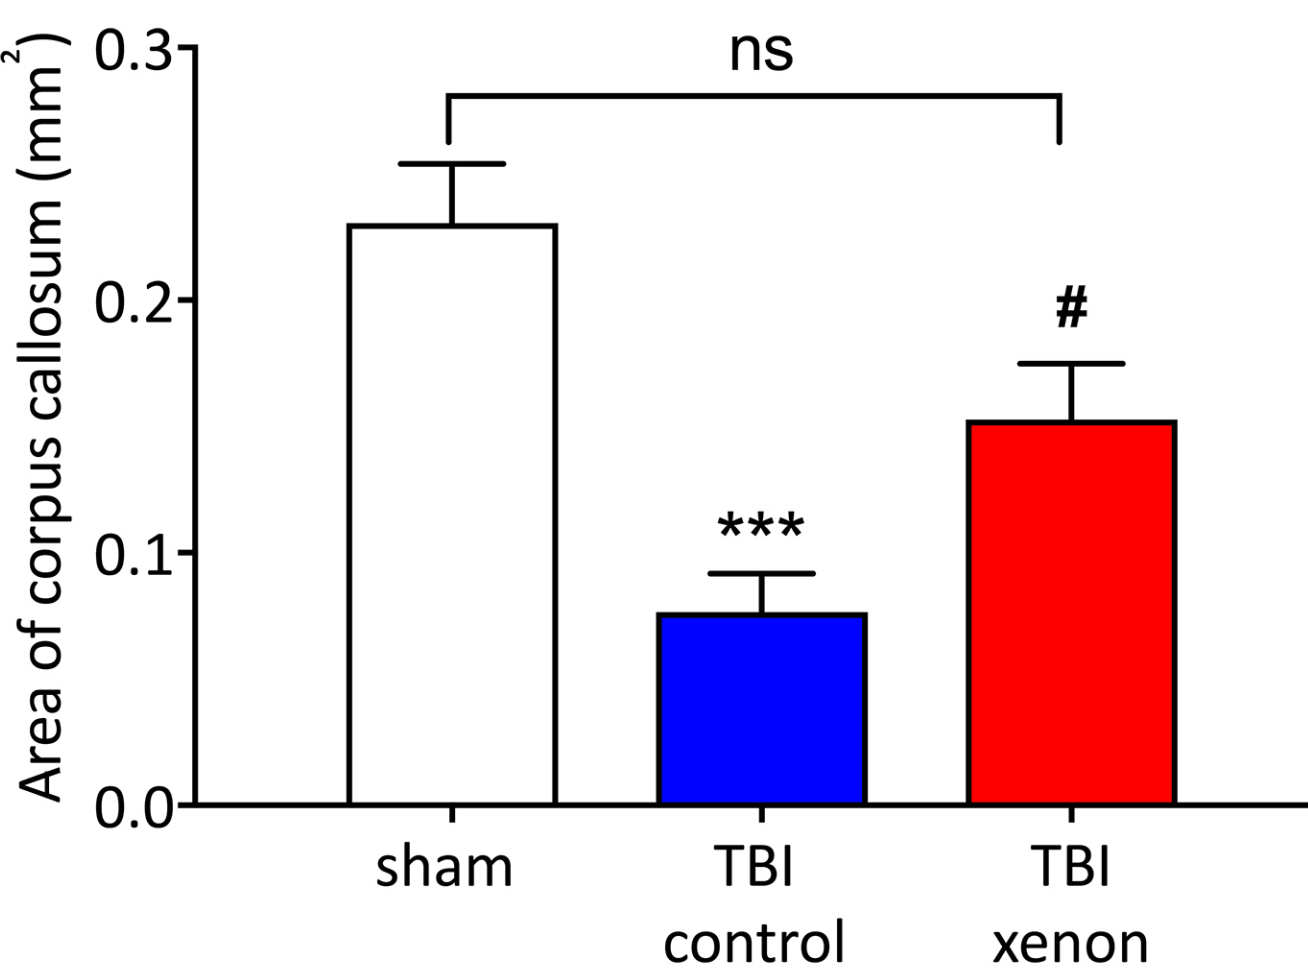 Graph showing size of the corpus callosum brain area. The corpus callosum was smaller in the TBI control group than in the xenon-treated group and uninjured healthy control group.